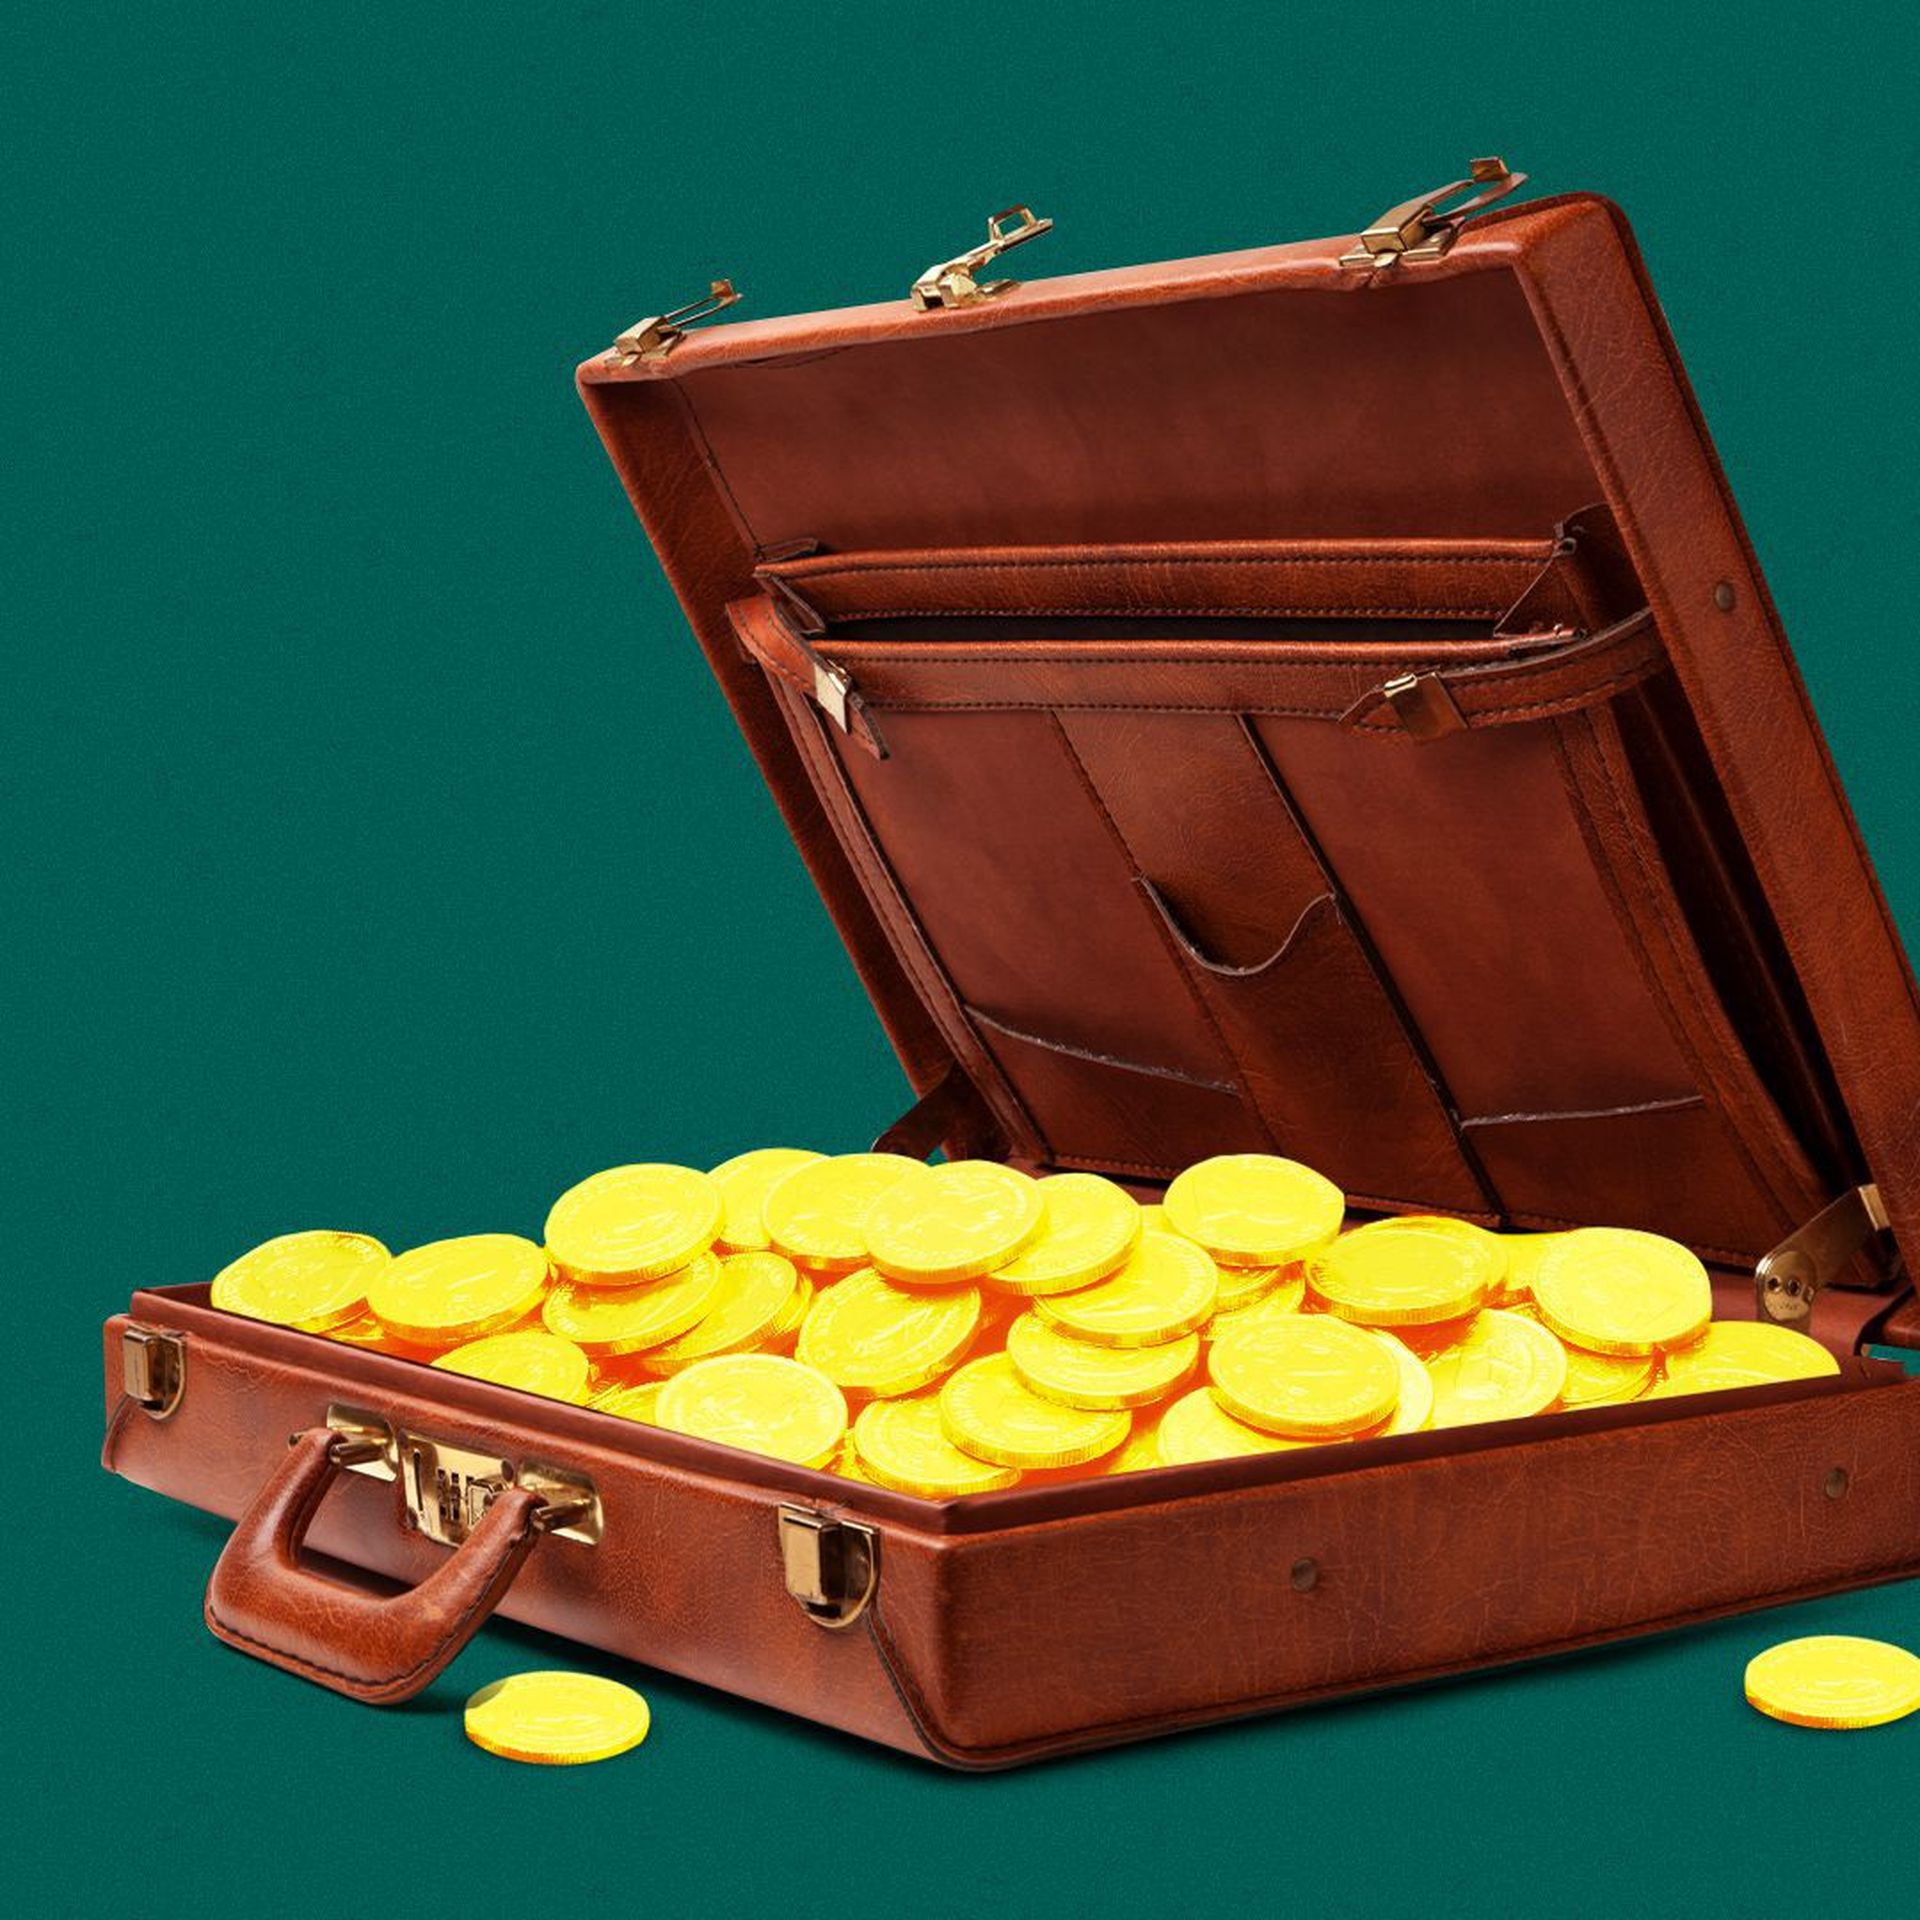 Suitcase with gold bitcoins